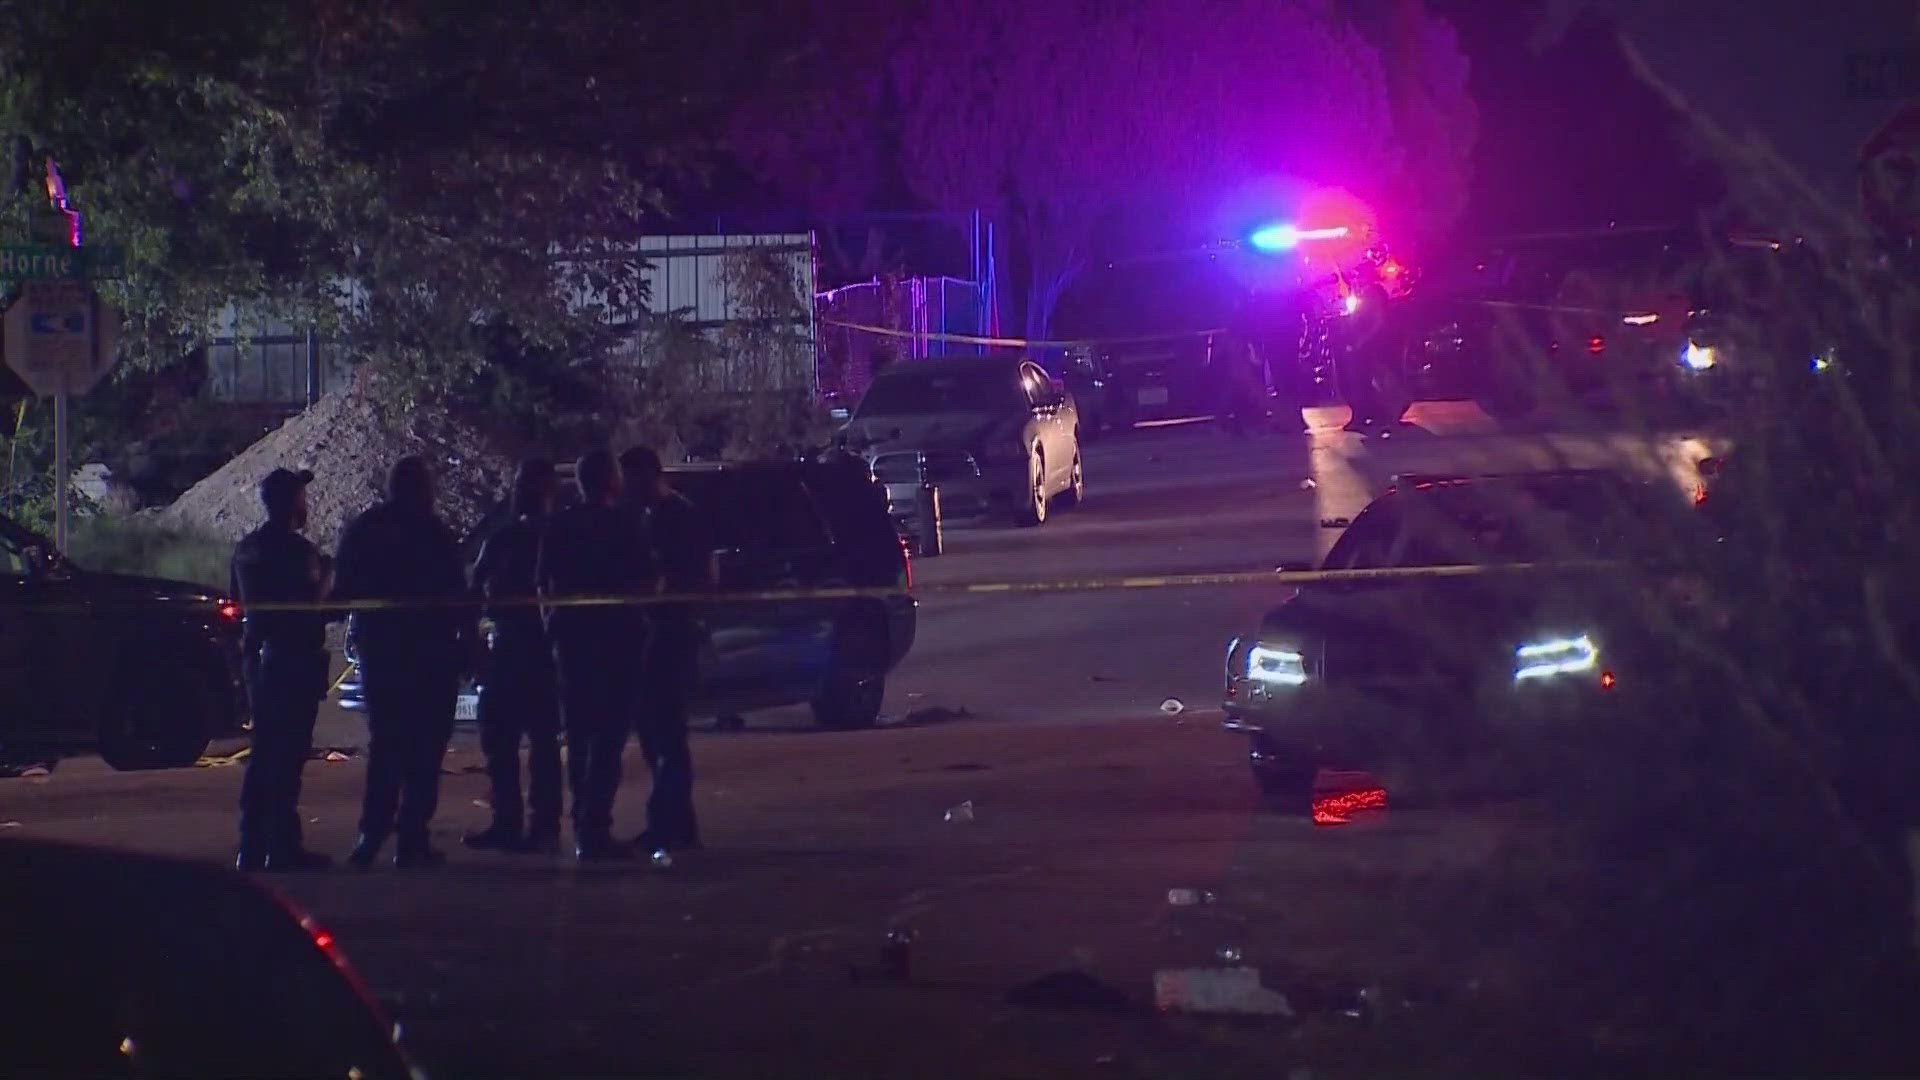 3 were killed and 8 injured las year in Fort Worth's historic Como neighborhood.